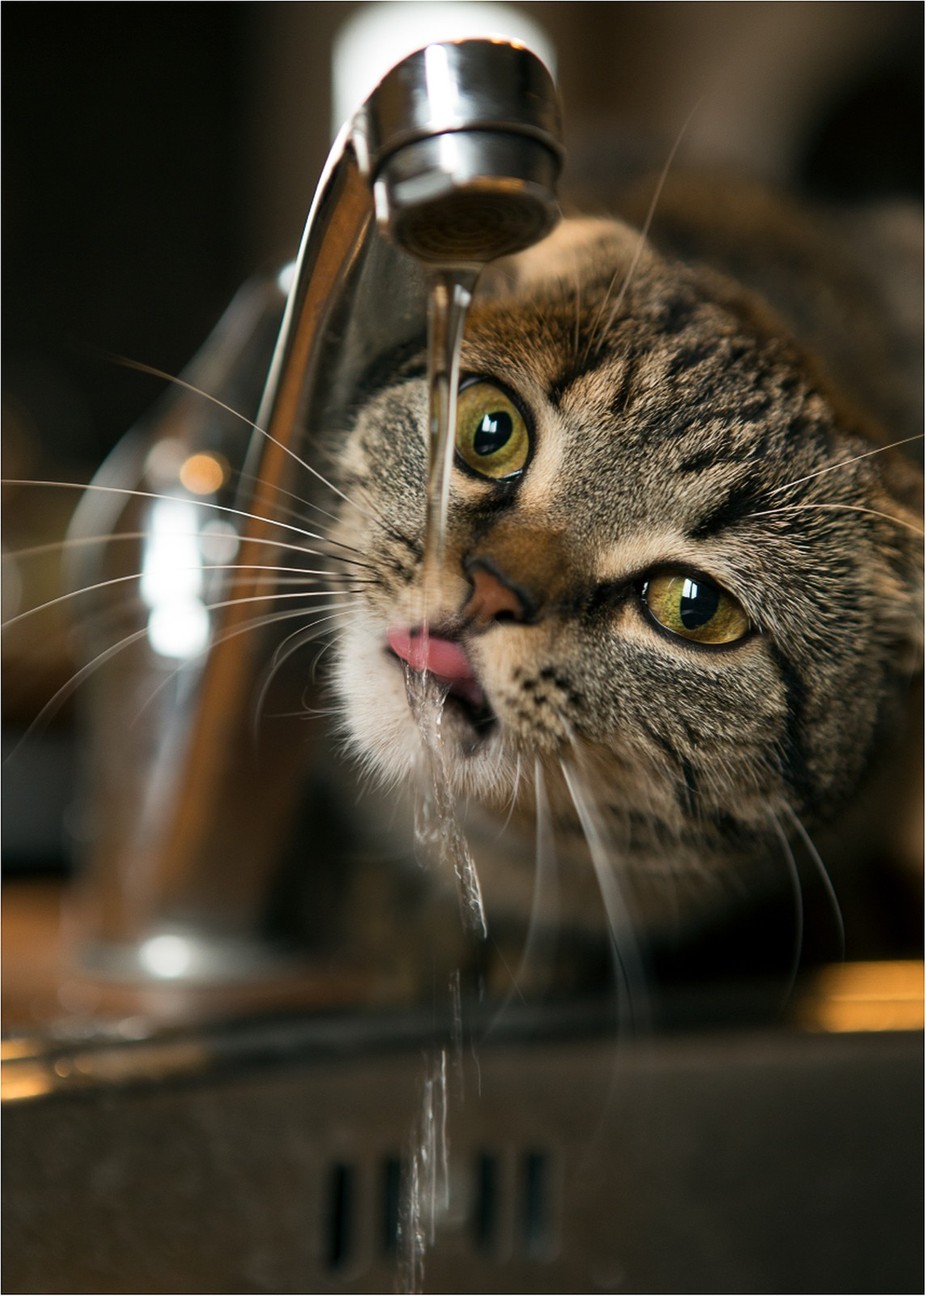 Thirst by lifearound - Cute Cats Photo Contest